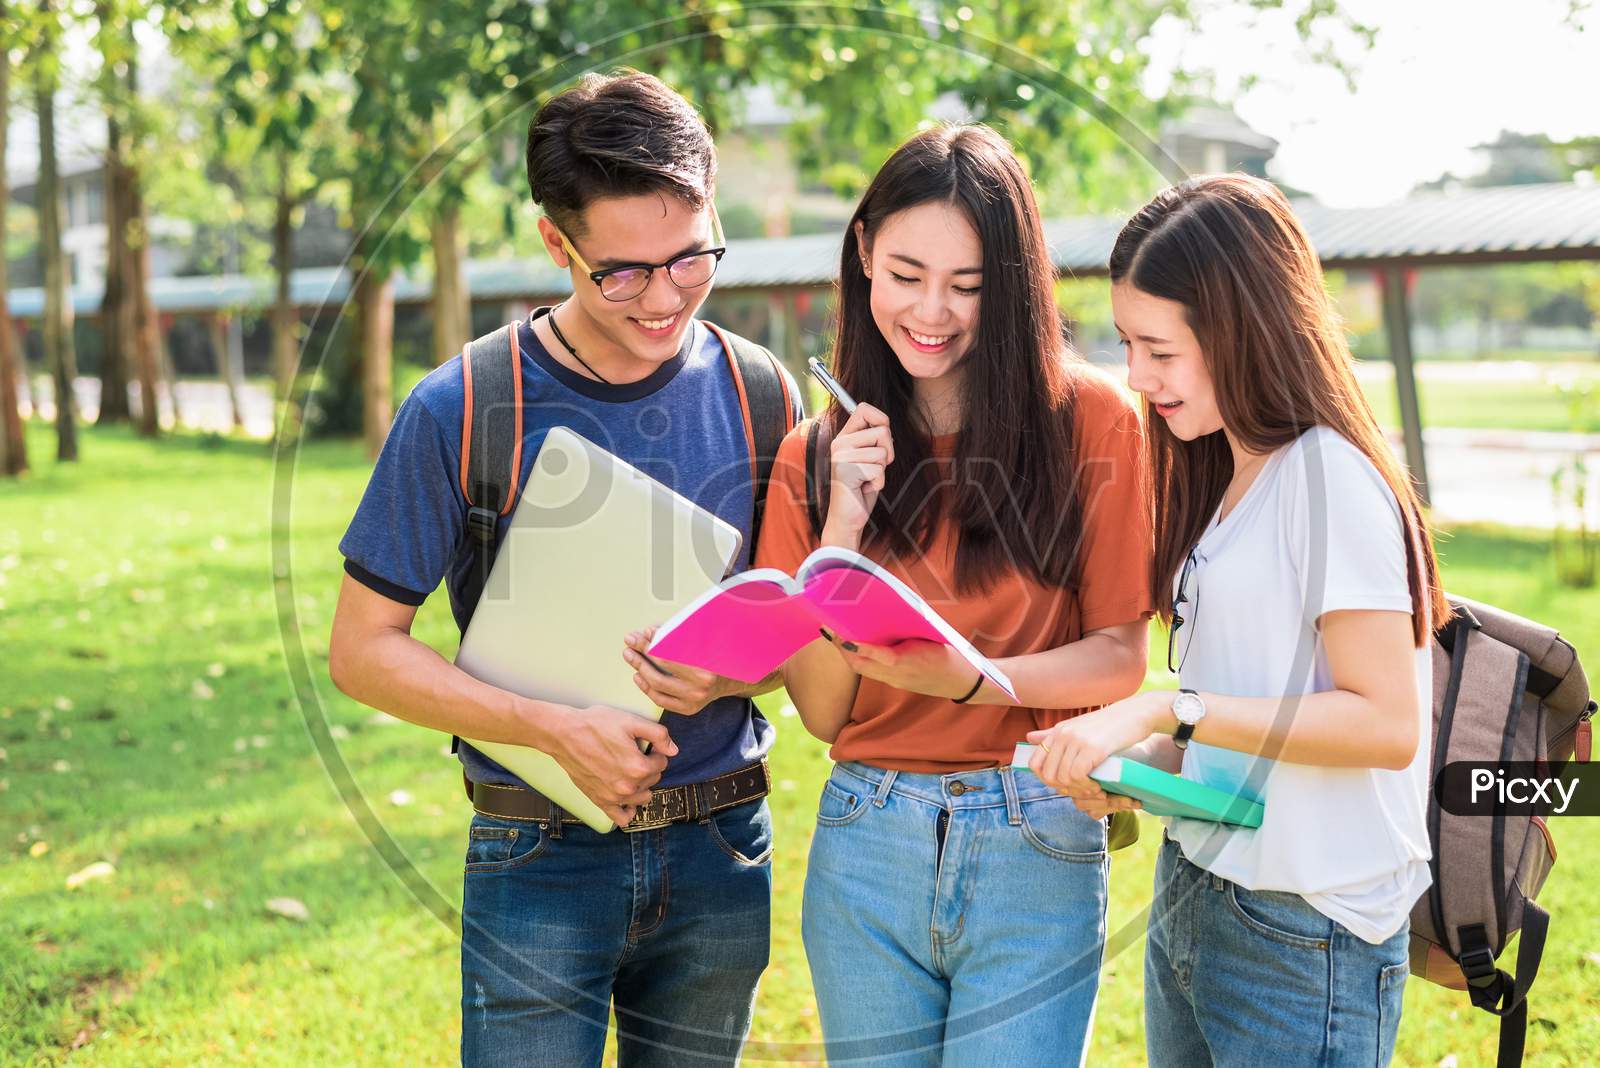 Three Asian Young Campus Students Enjoy Tutoring And Reading Books Together. Friendship And Education Concept. Campus School And University Theme. Happiness And Funny Of Learning In College